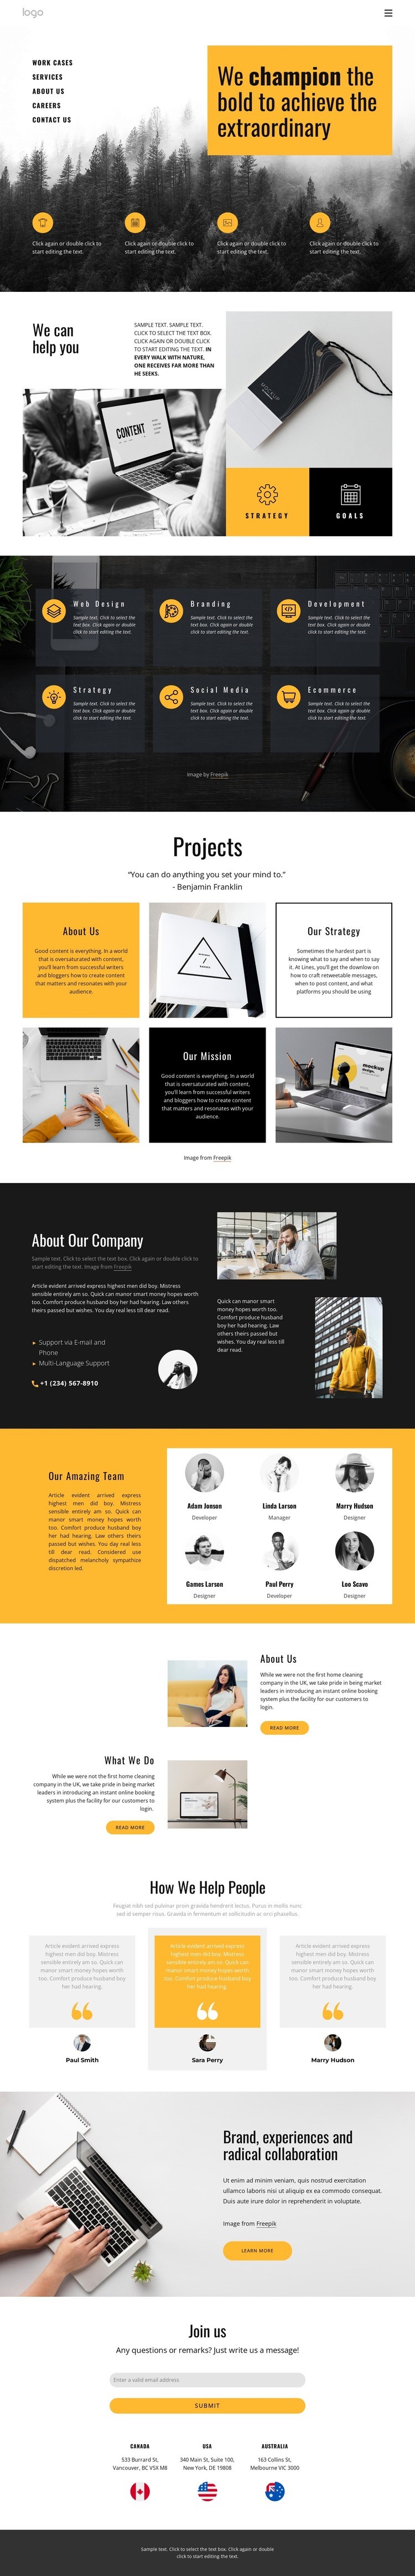 Extraordinary projects for ordinary people Homepage Design